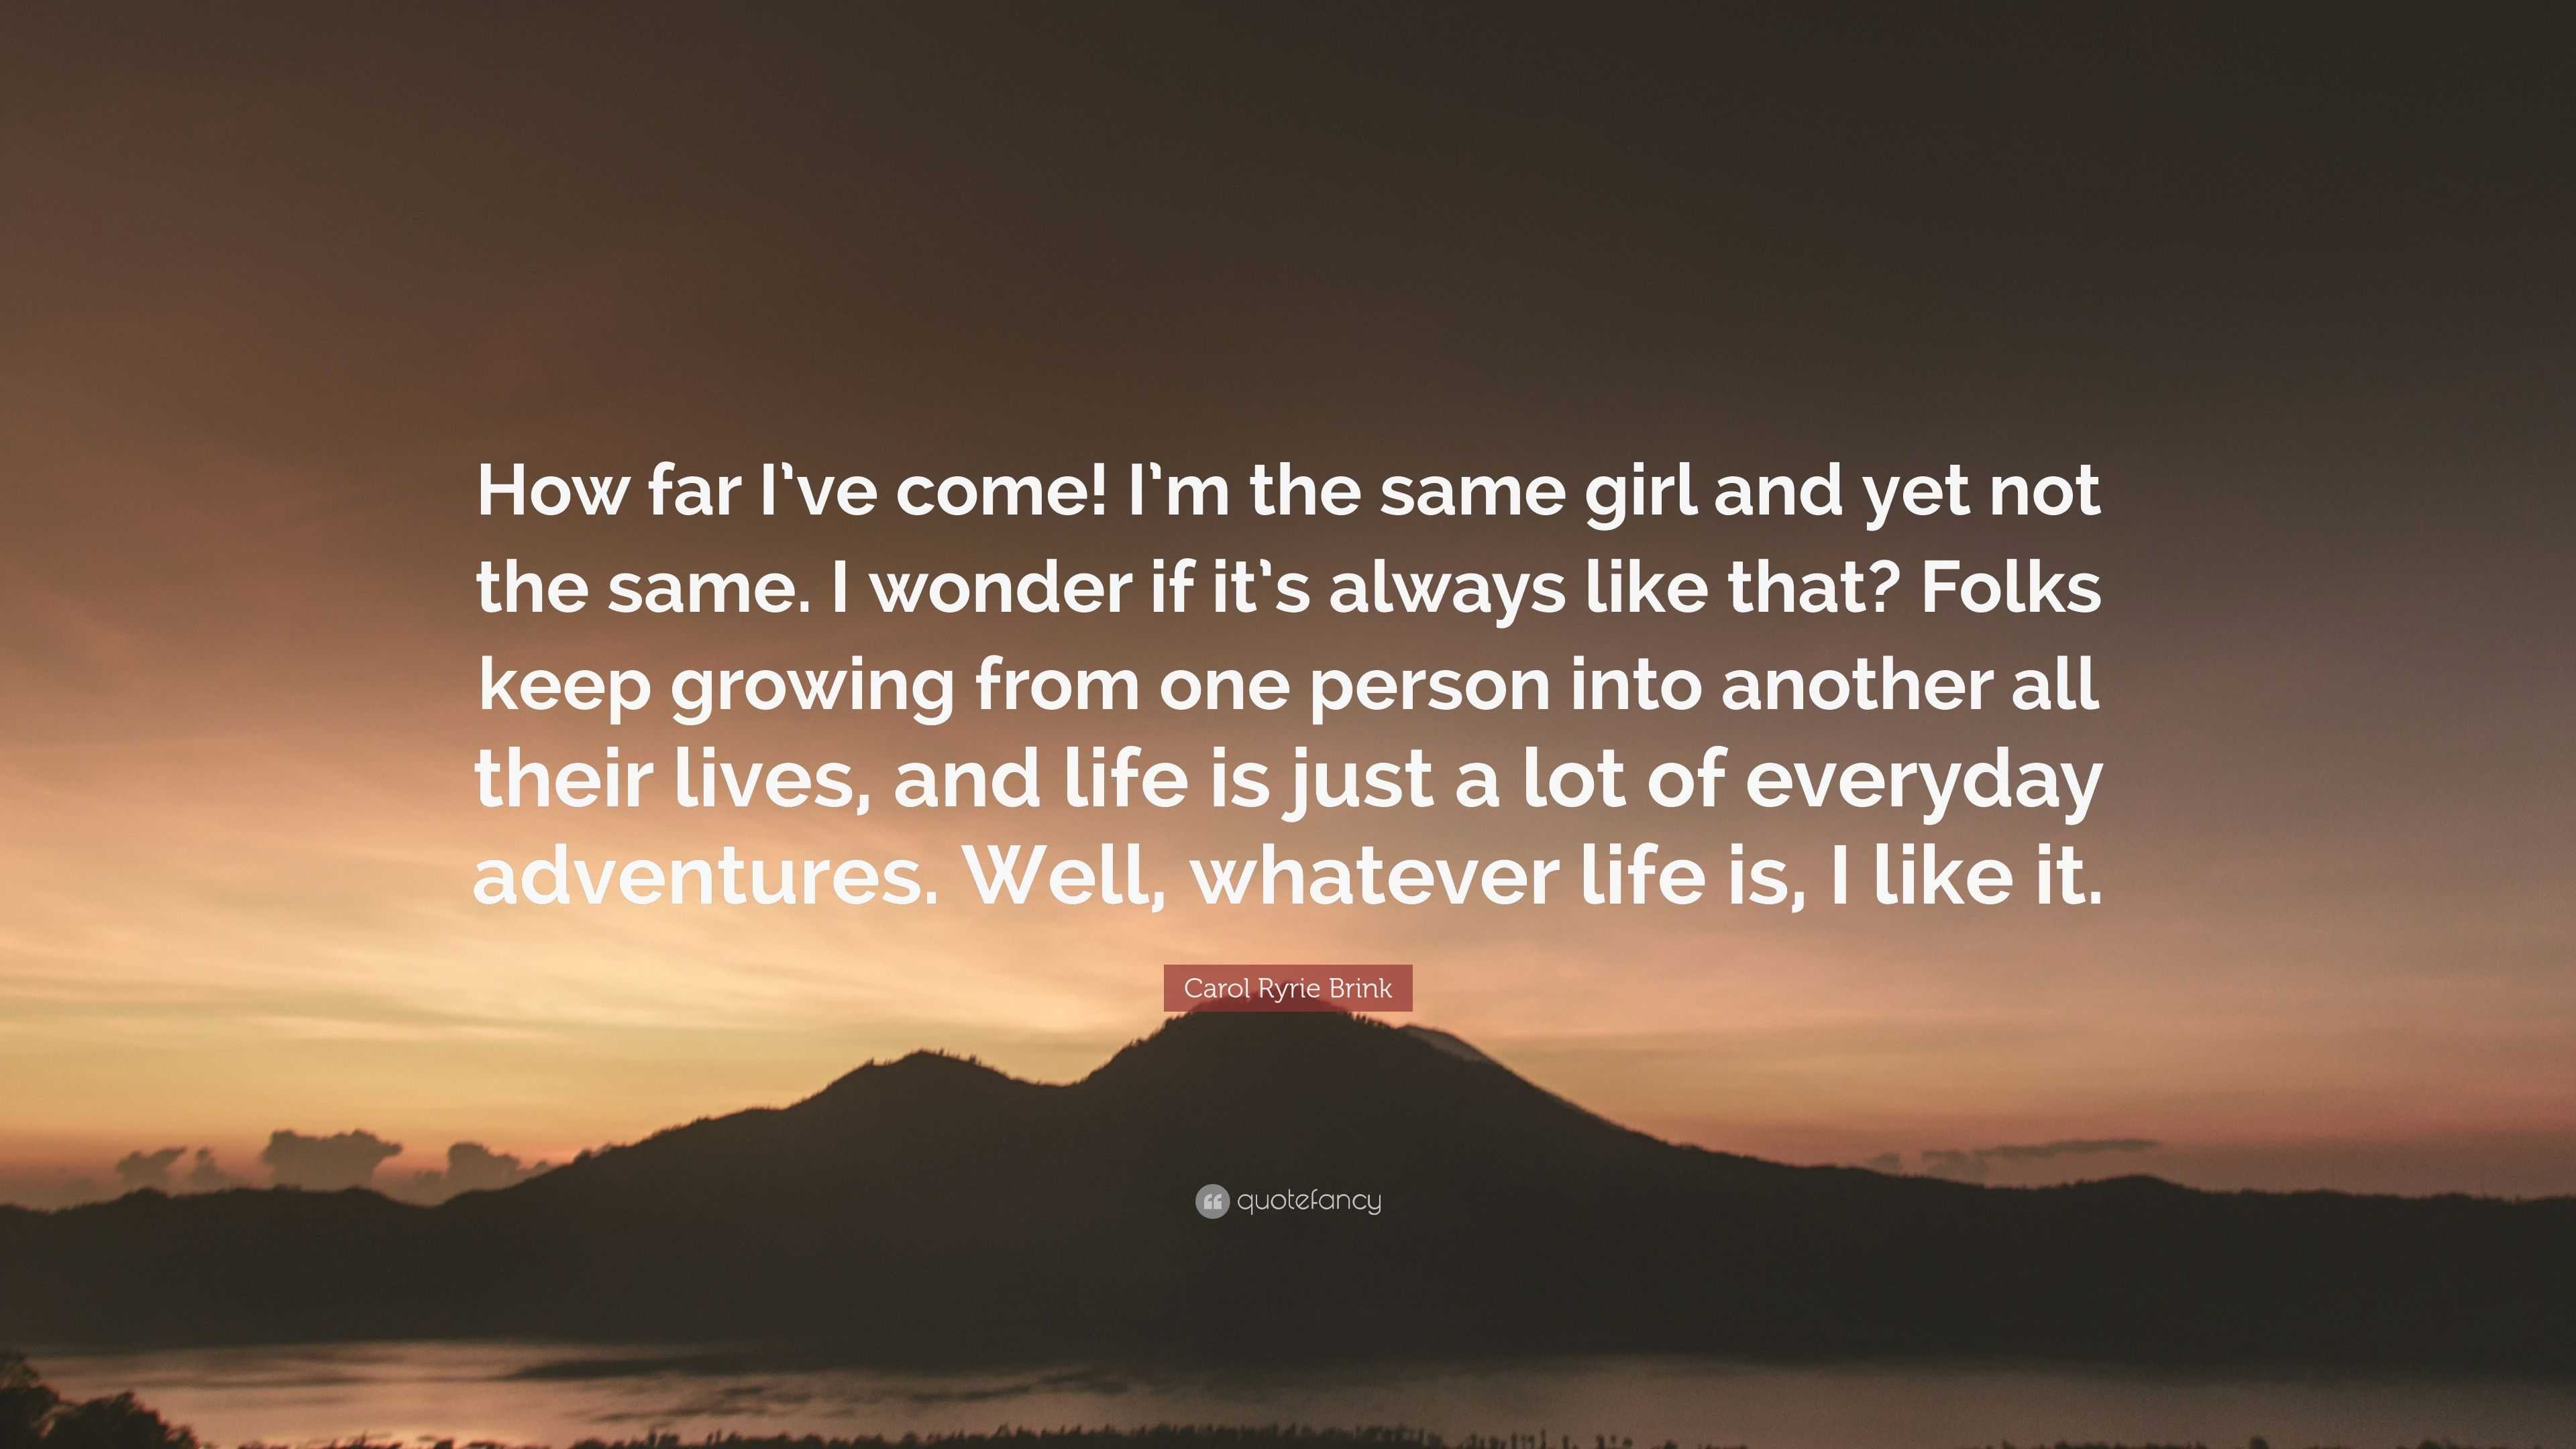 Carol Ryrie Brink Quote: “How Far I've Come! I'm The Same Girl And Yet Not The Same. I Wonder If It's Always Like That? Folks Keep Growing From On...”